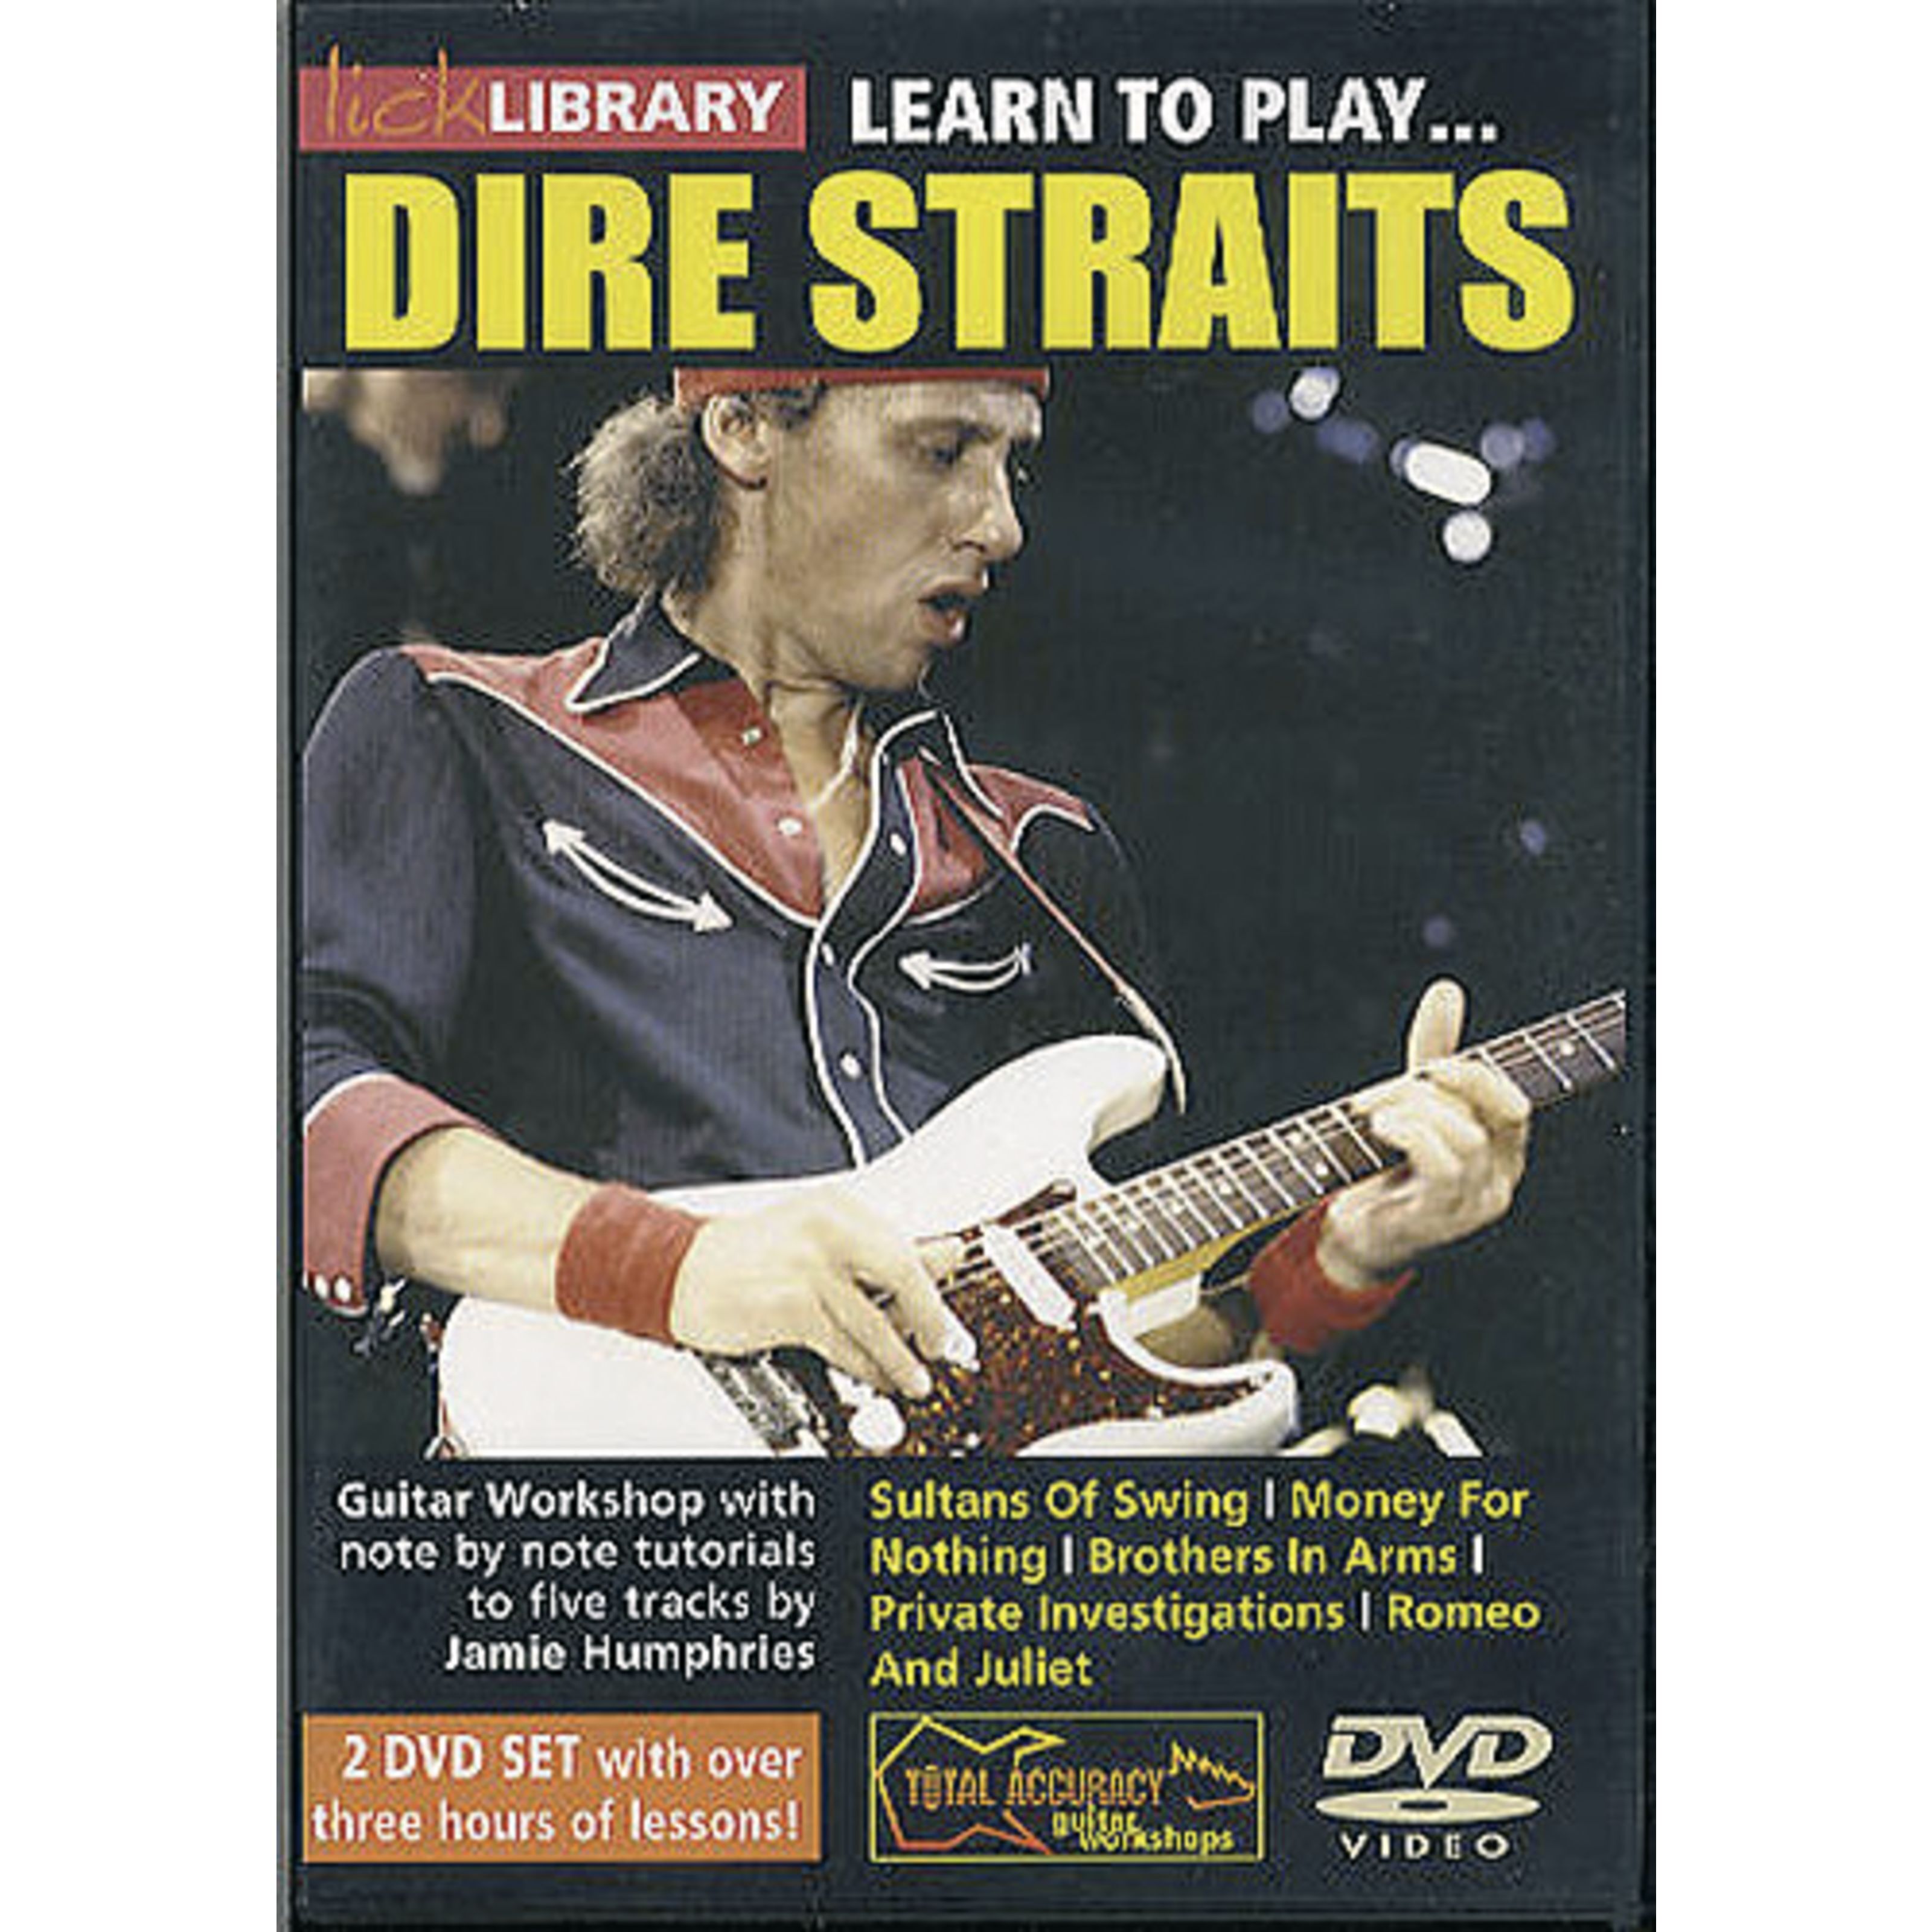 Roadrock International Lick Library: Learn To Play Dire Straits DVD - DVD